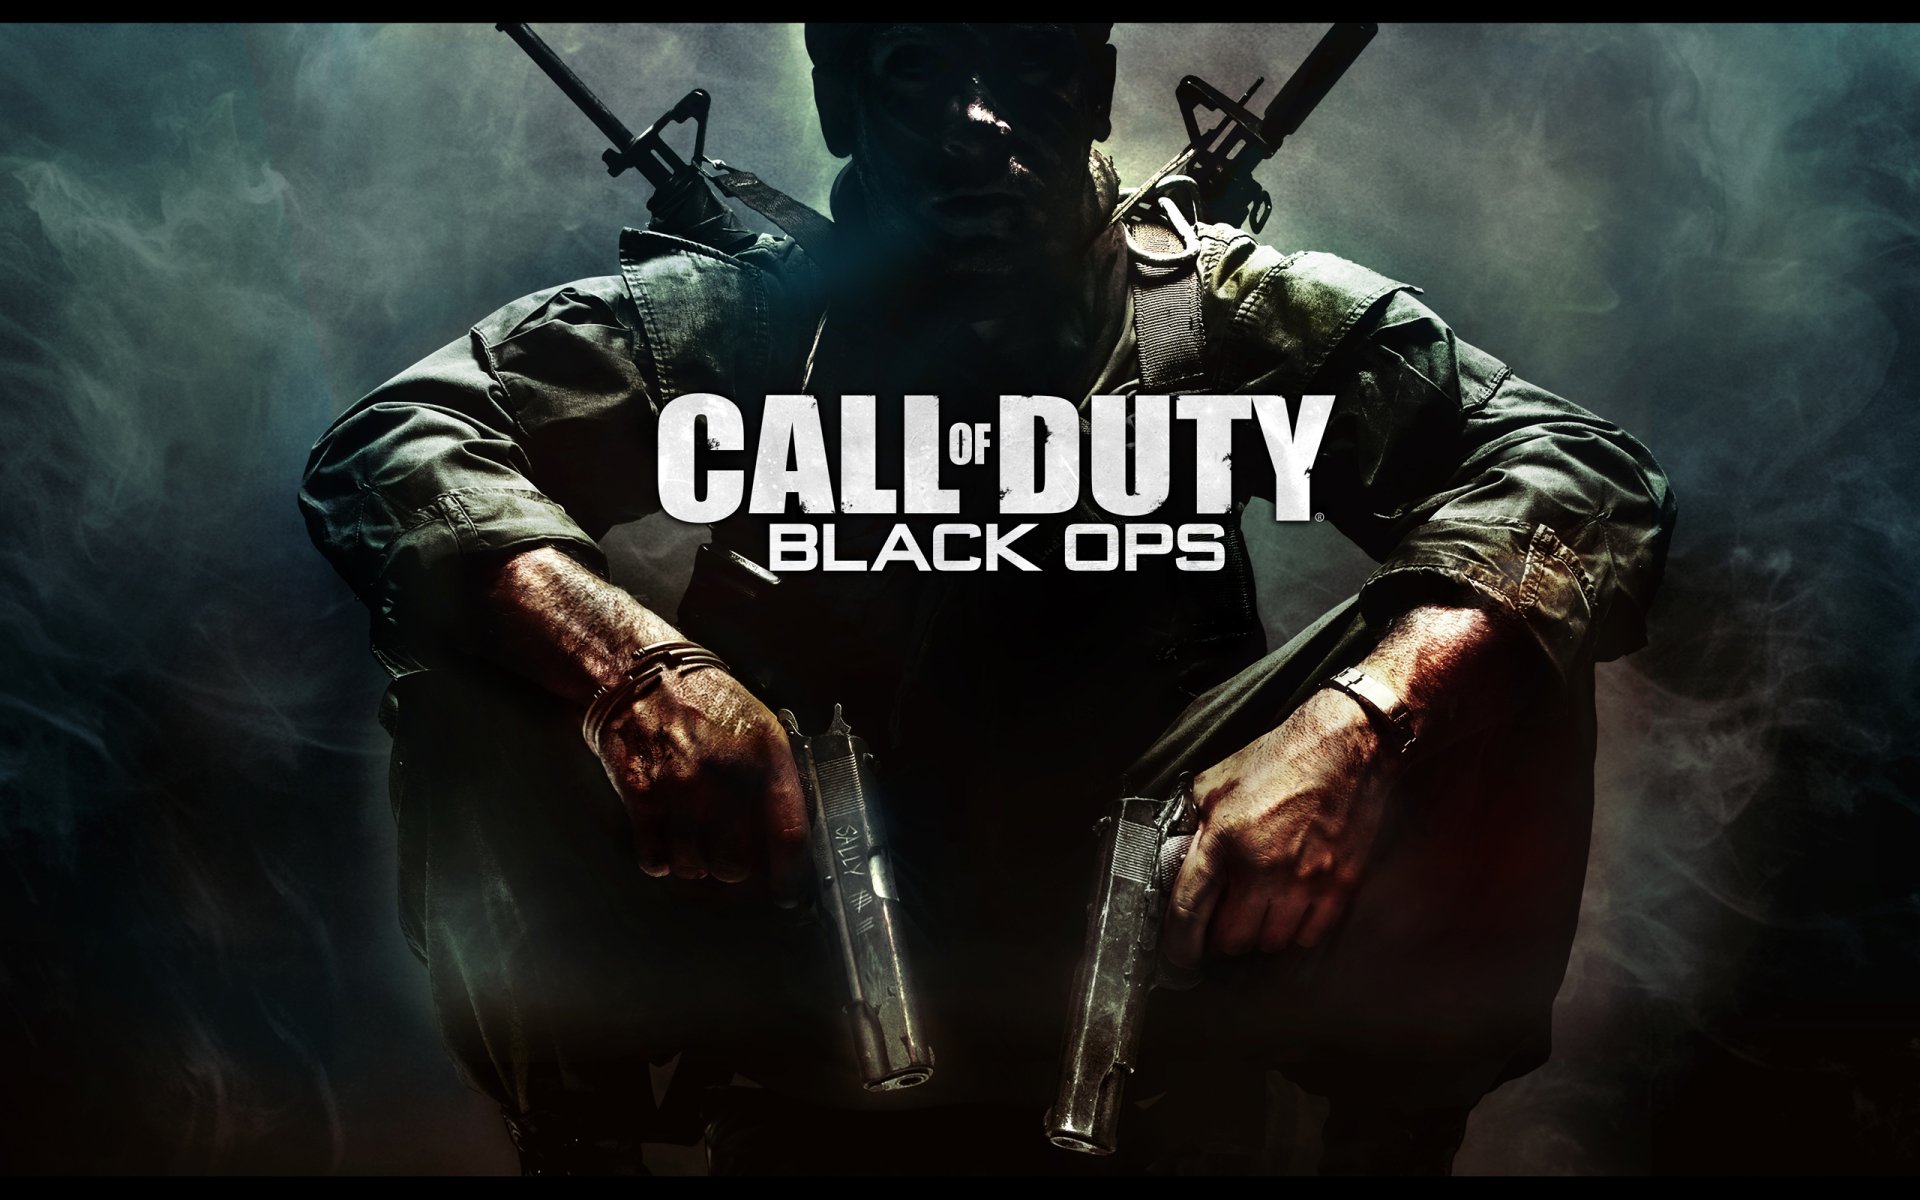 Call Of Duty Black Ops HD Wallpaper Background Image